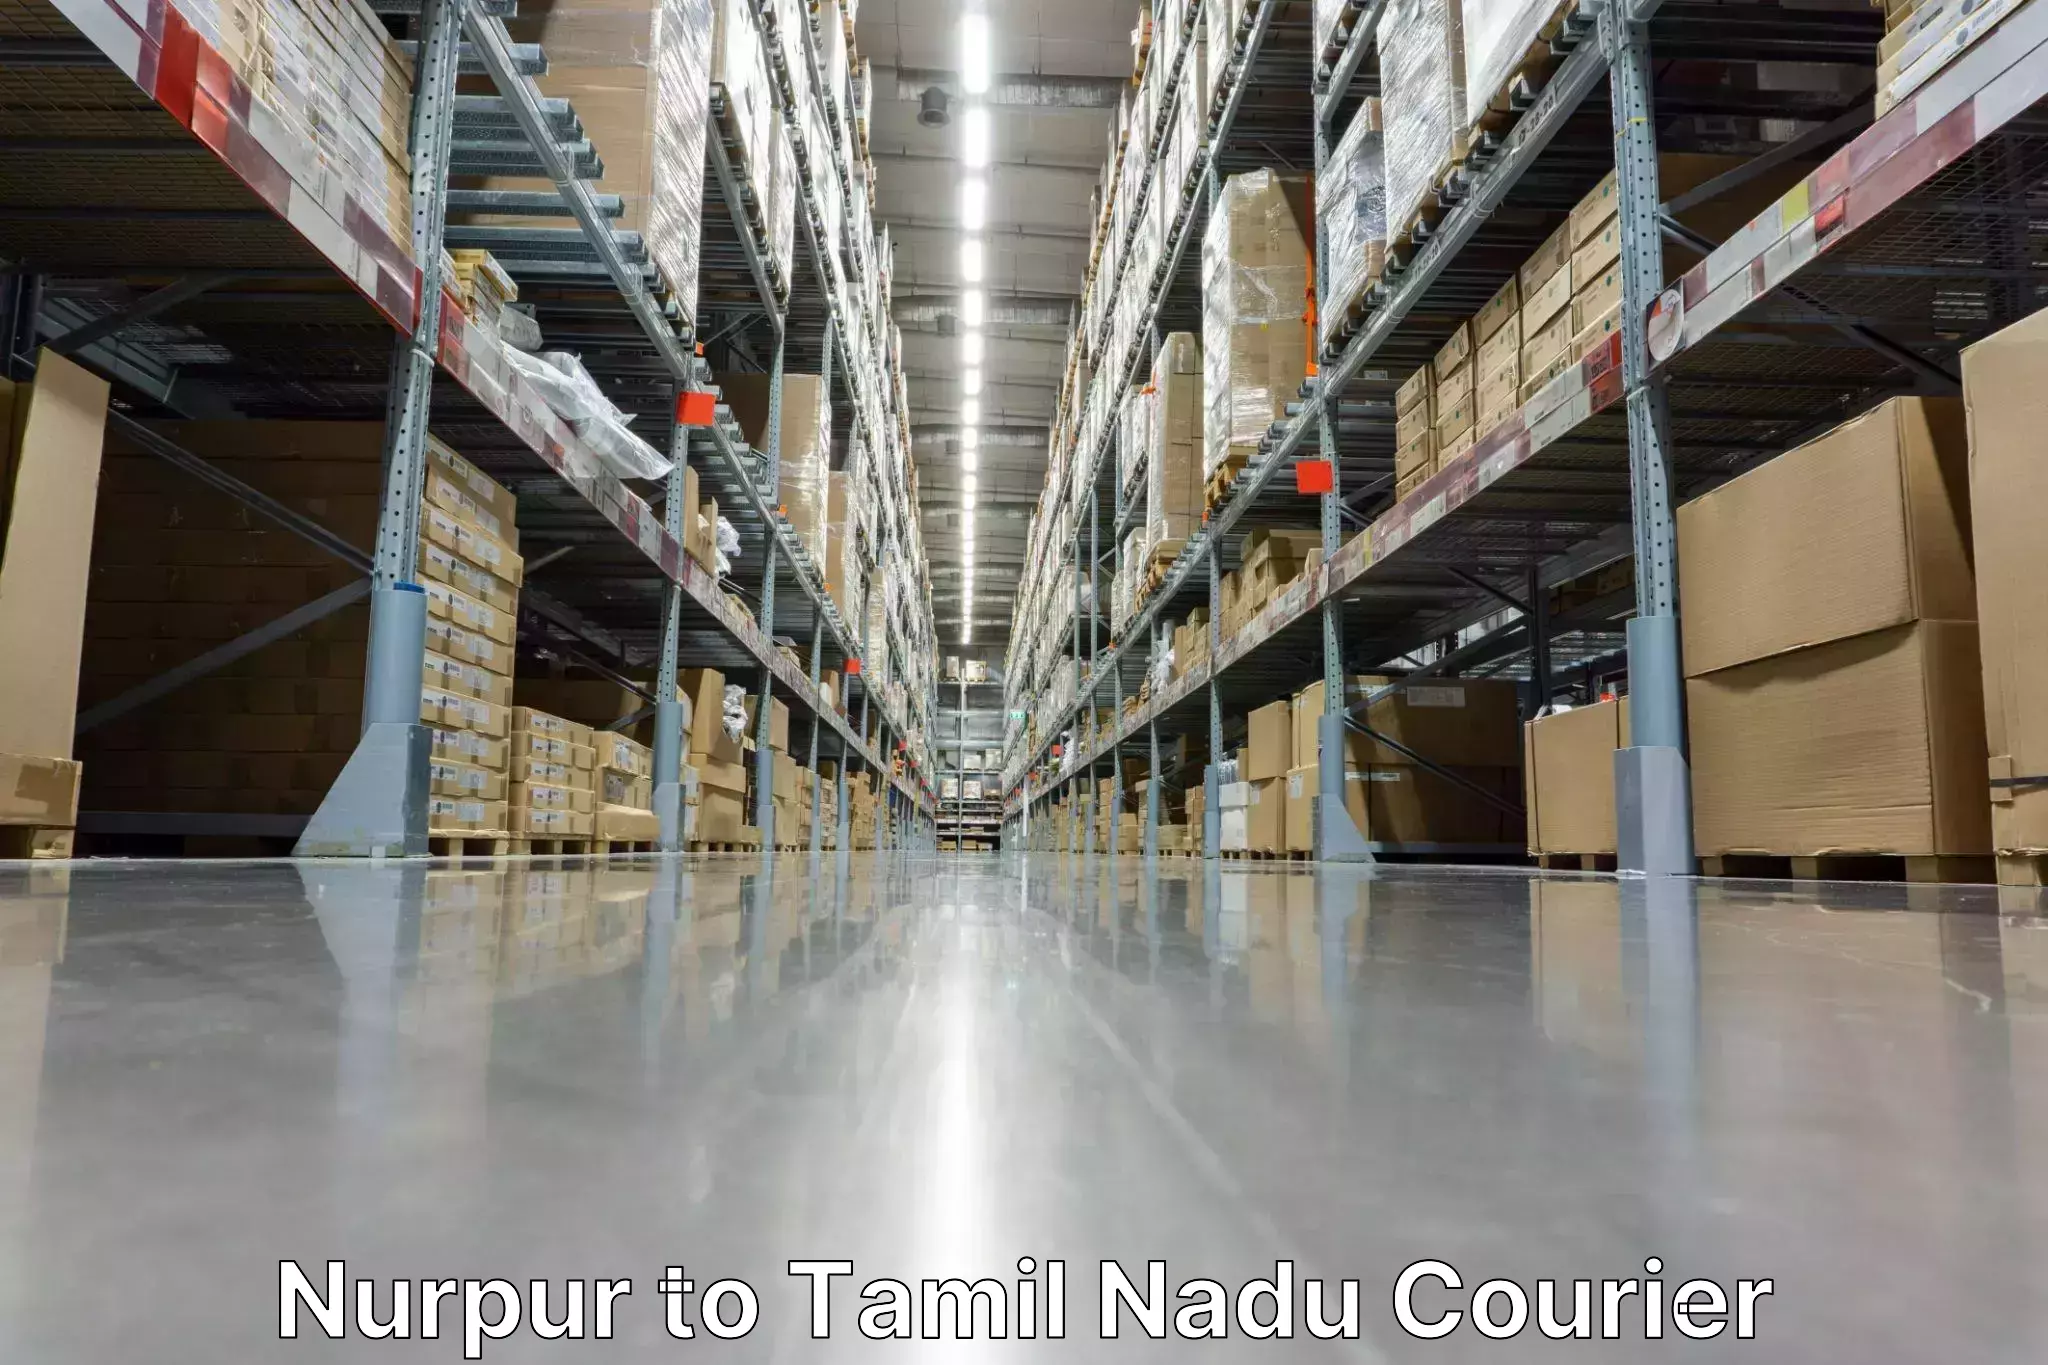 On-call courier service Nurpur to Erode